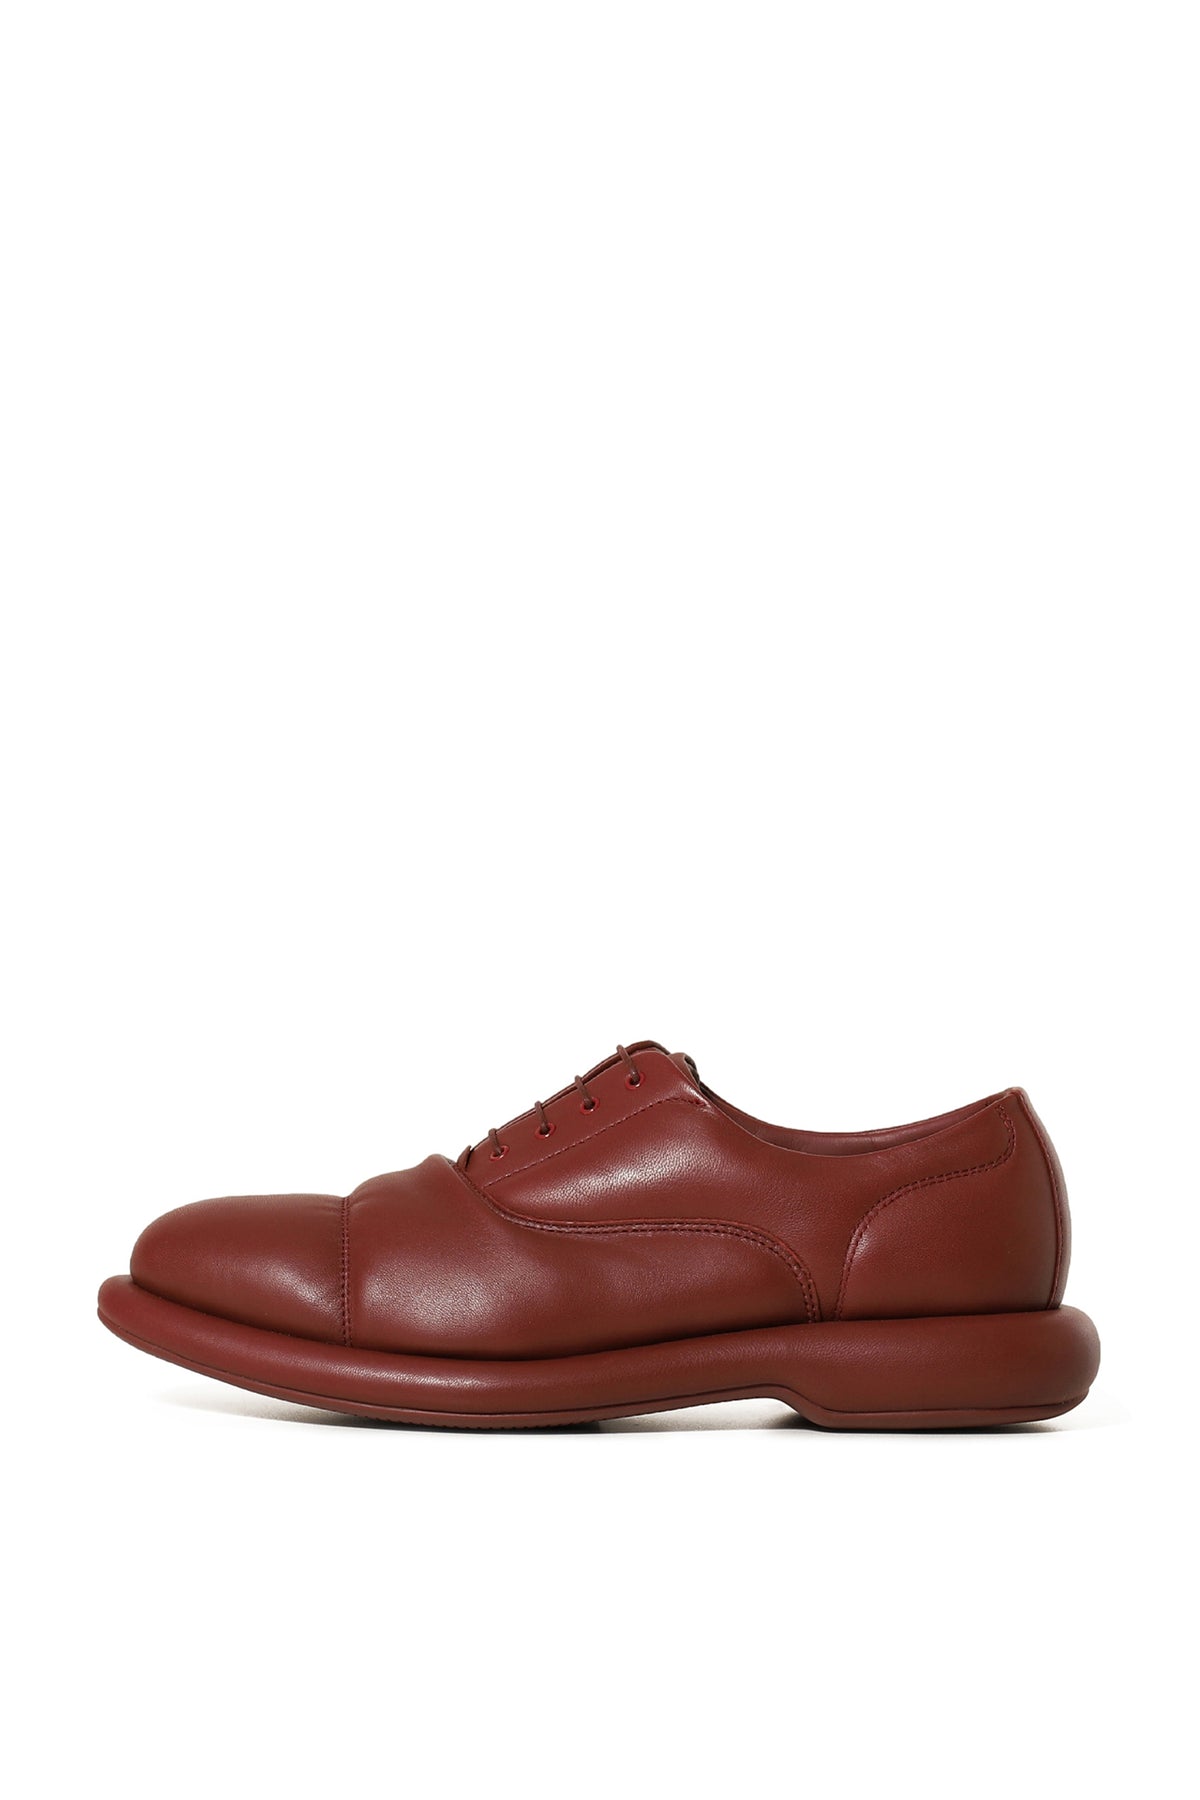 THE OXFORD1 / OX-BLOOD LEATHER